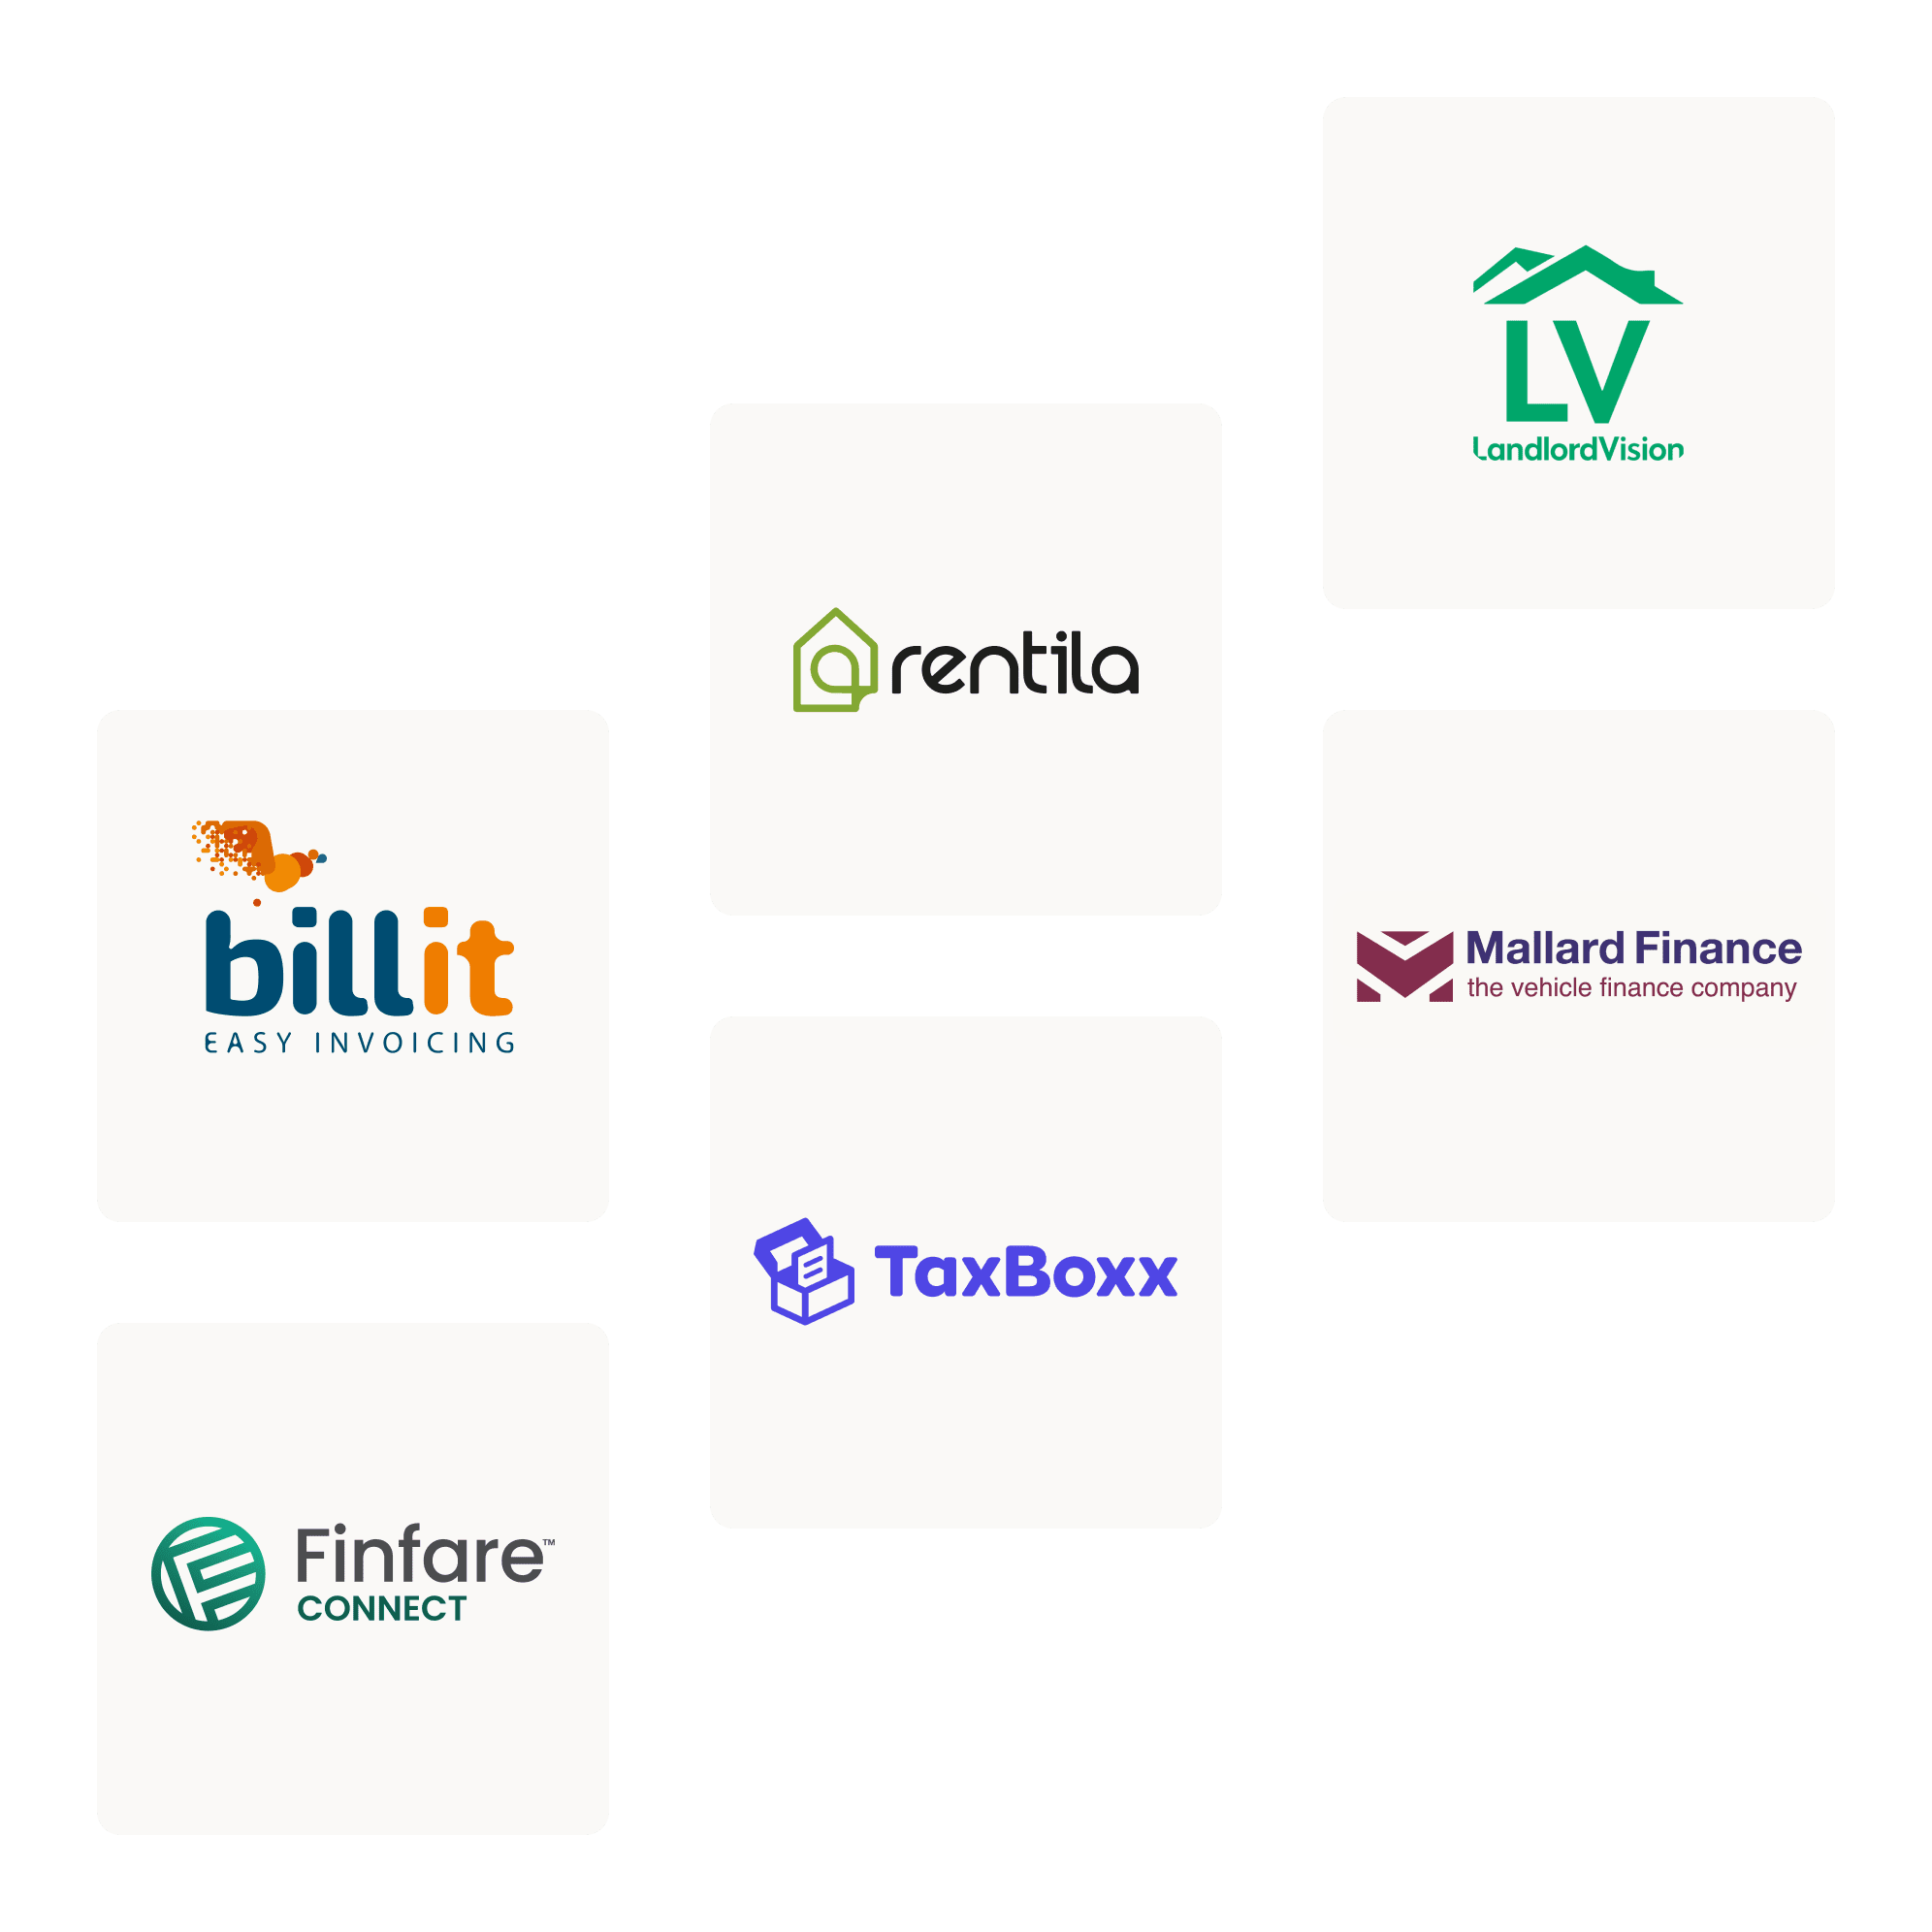 Trusted by over 800 businesses across various industries